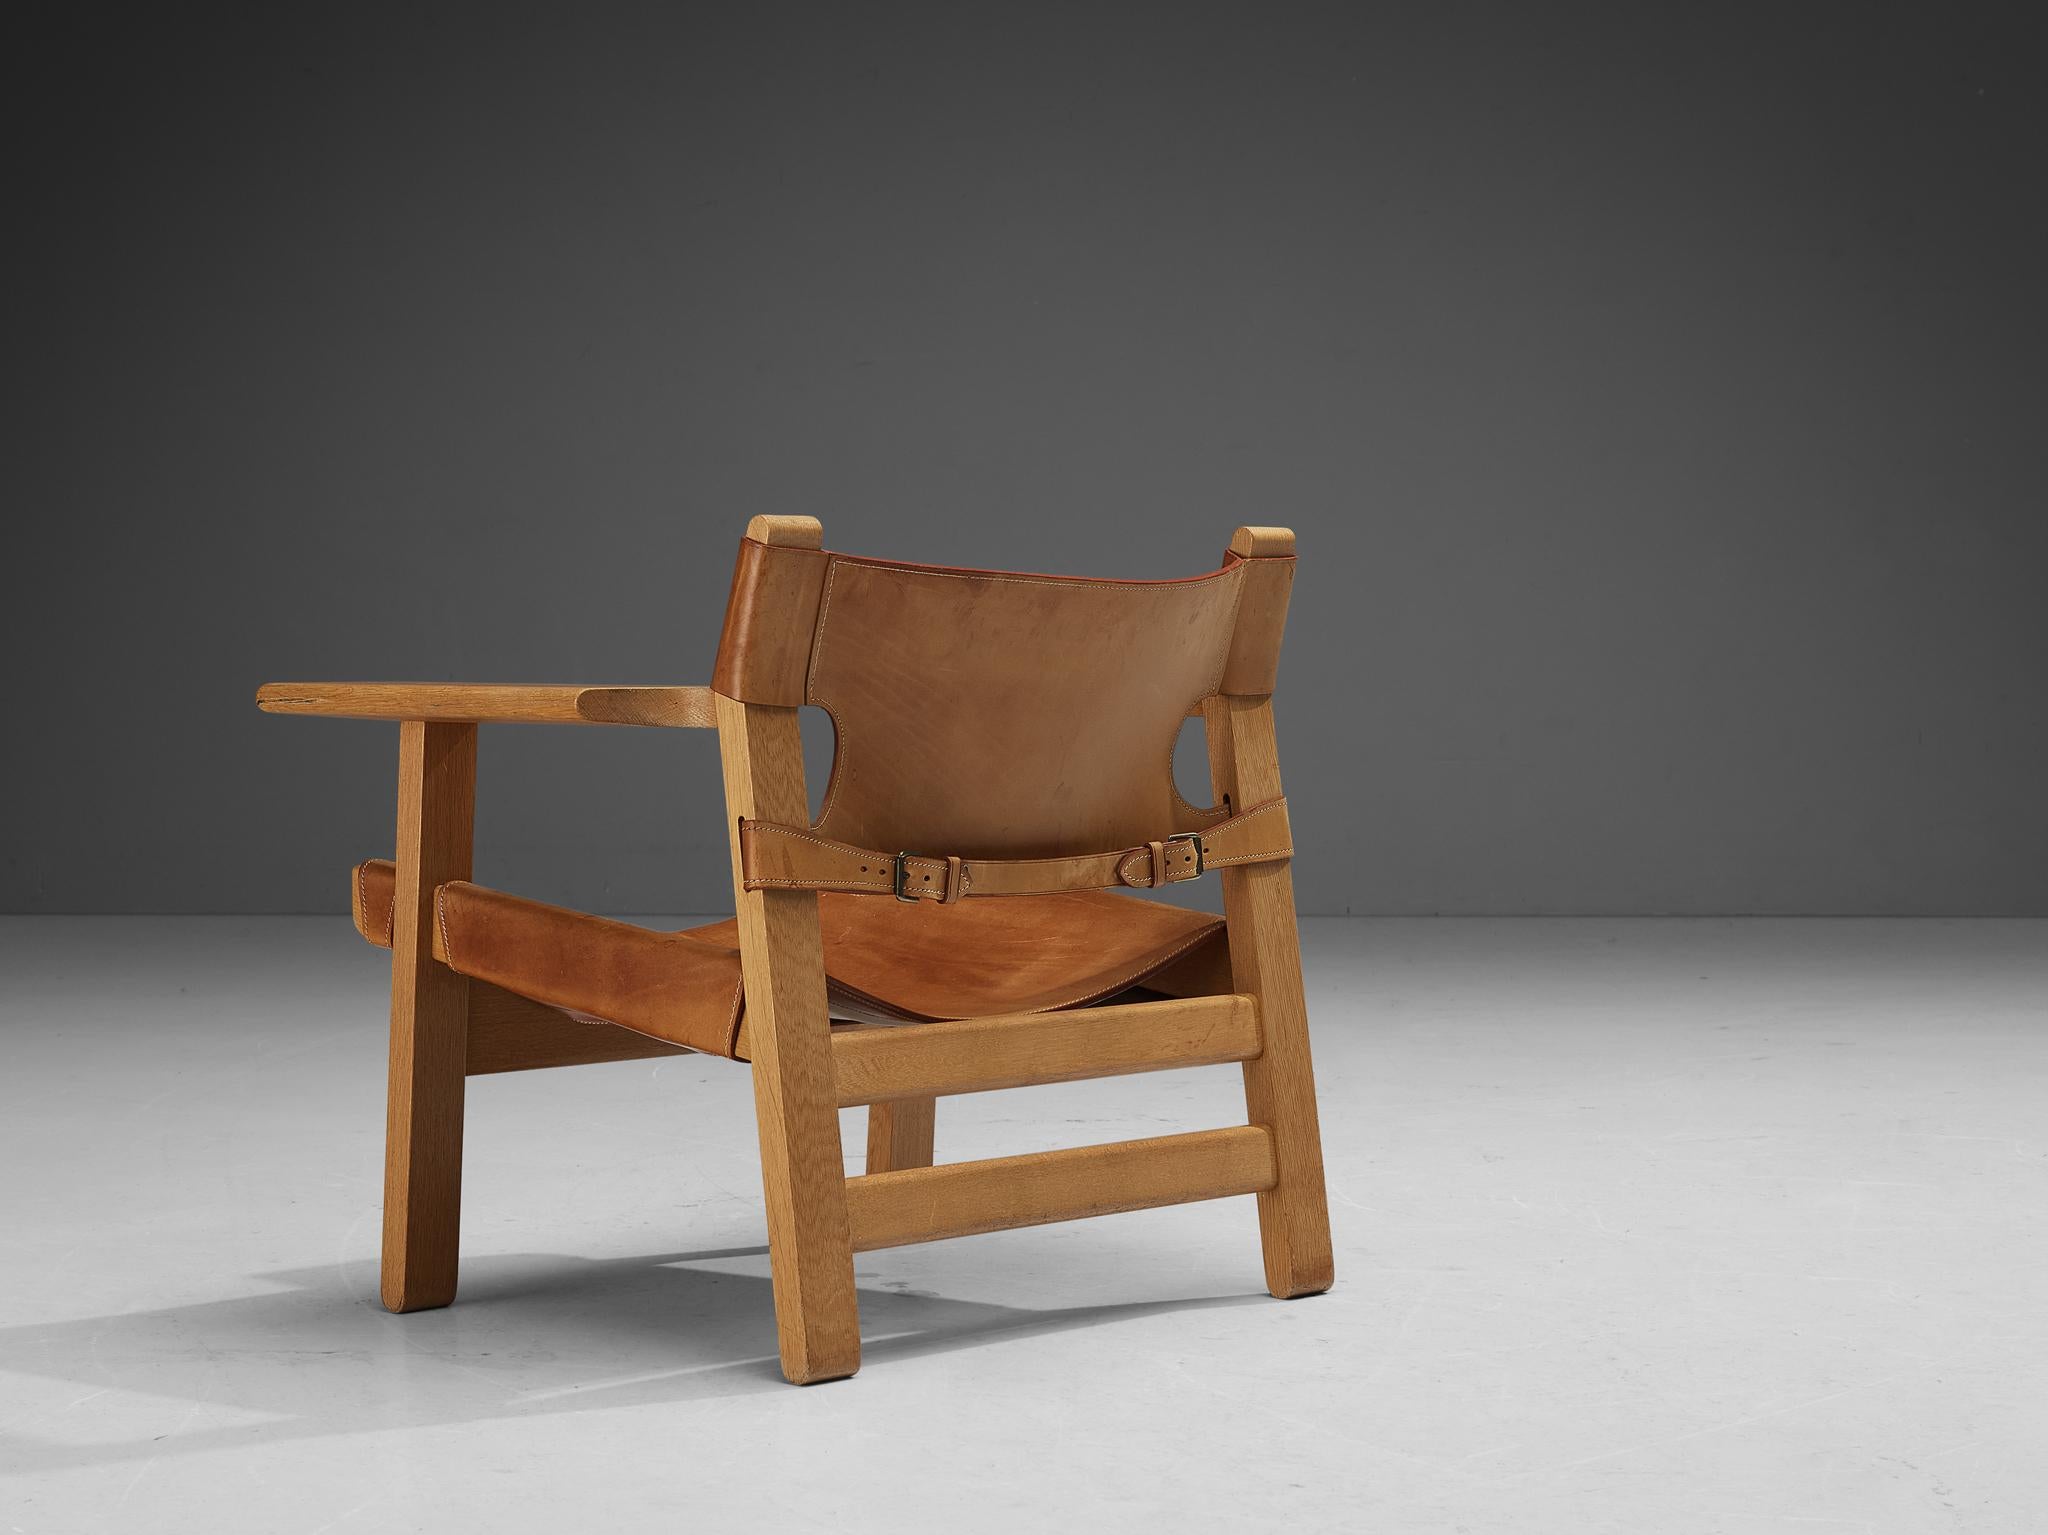 Børge Mogensen for Fredericia Stolefabrik, 'Spanish Chair,' oak, leather, brass, Denmark, 1958.

This well-known design by Børge Mogensen has a very strong appearance. The sincere construction and type of upholstery, give the chair a character of